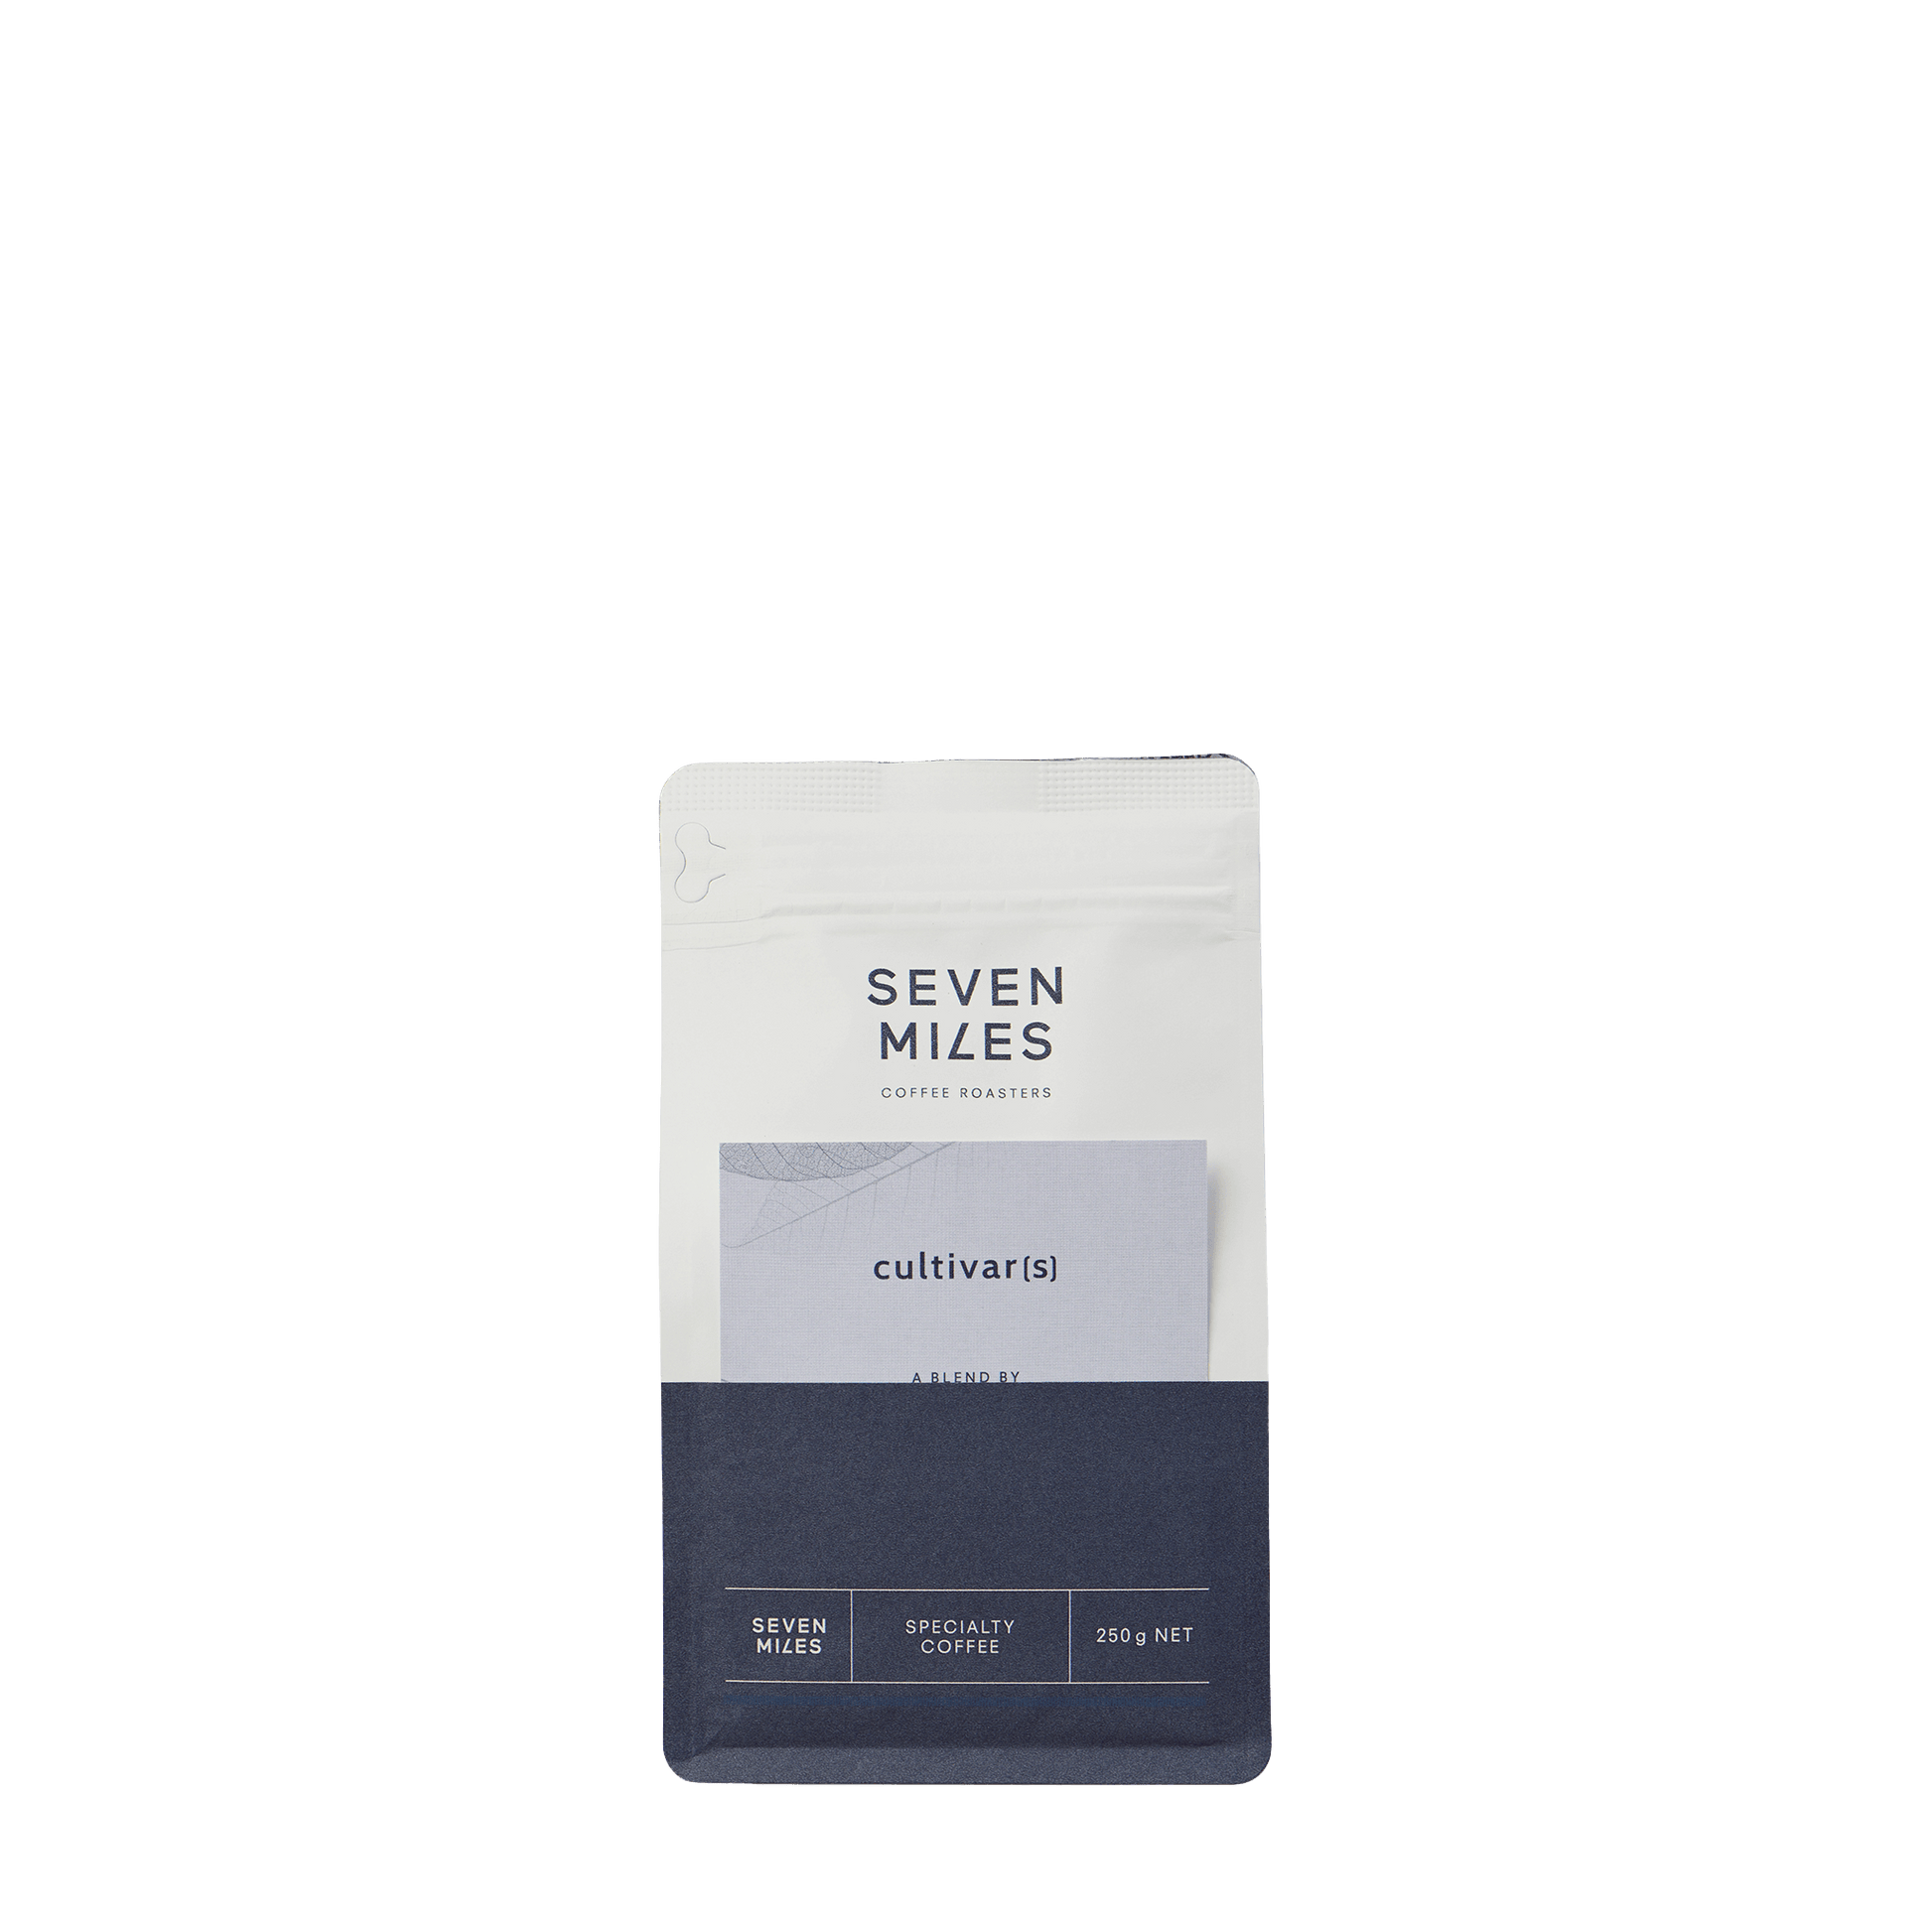 The Cultivar coffee blend 250g is a washed Burundi, a Java that’s been processed through wet hulling, and a stunning natural Brazil from the Mountainous south-east Mantiqueira region. It delivers a beautifully balanced blend of creamy milk chocolate flavours combined with elegant notes of mandarin & cinnamon spice. 